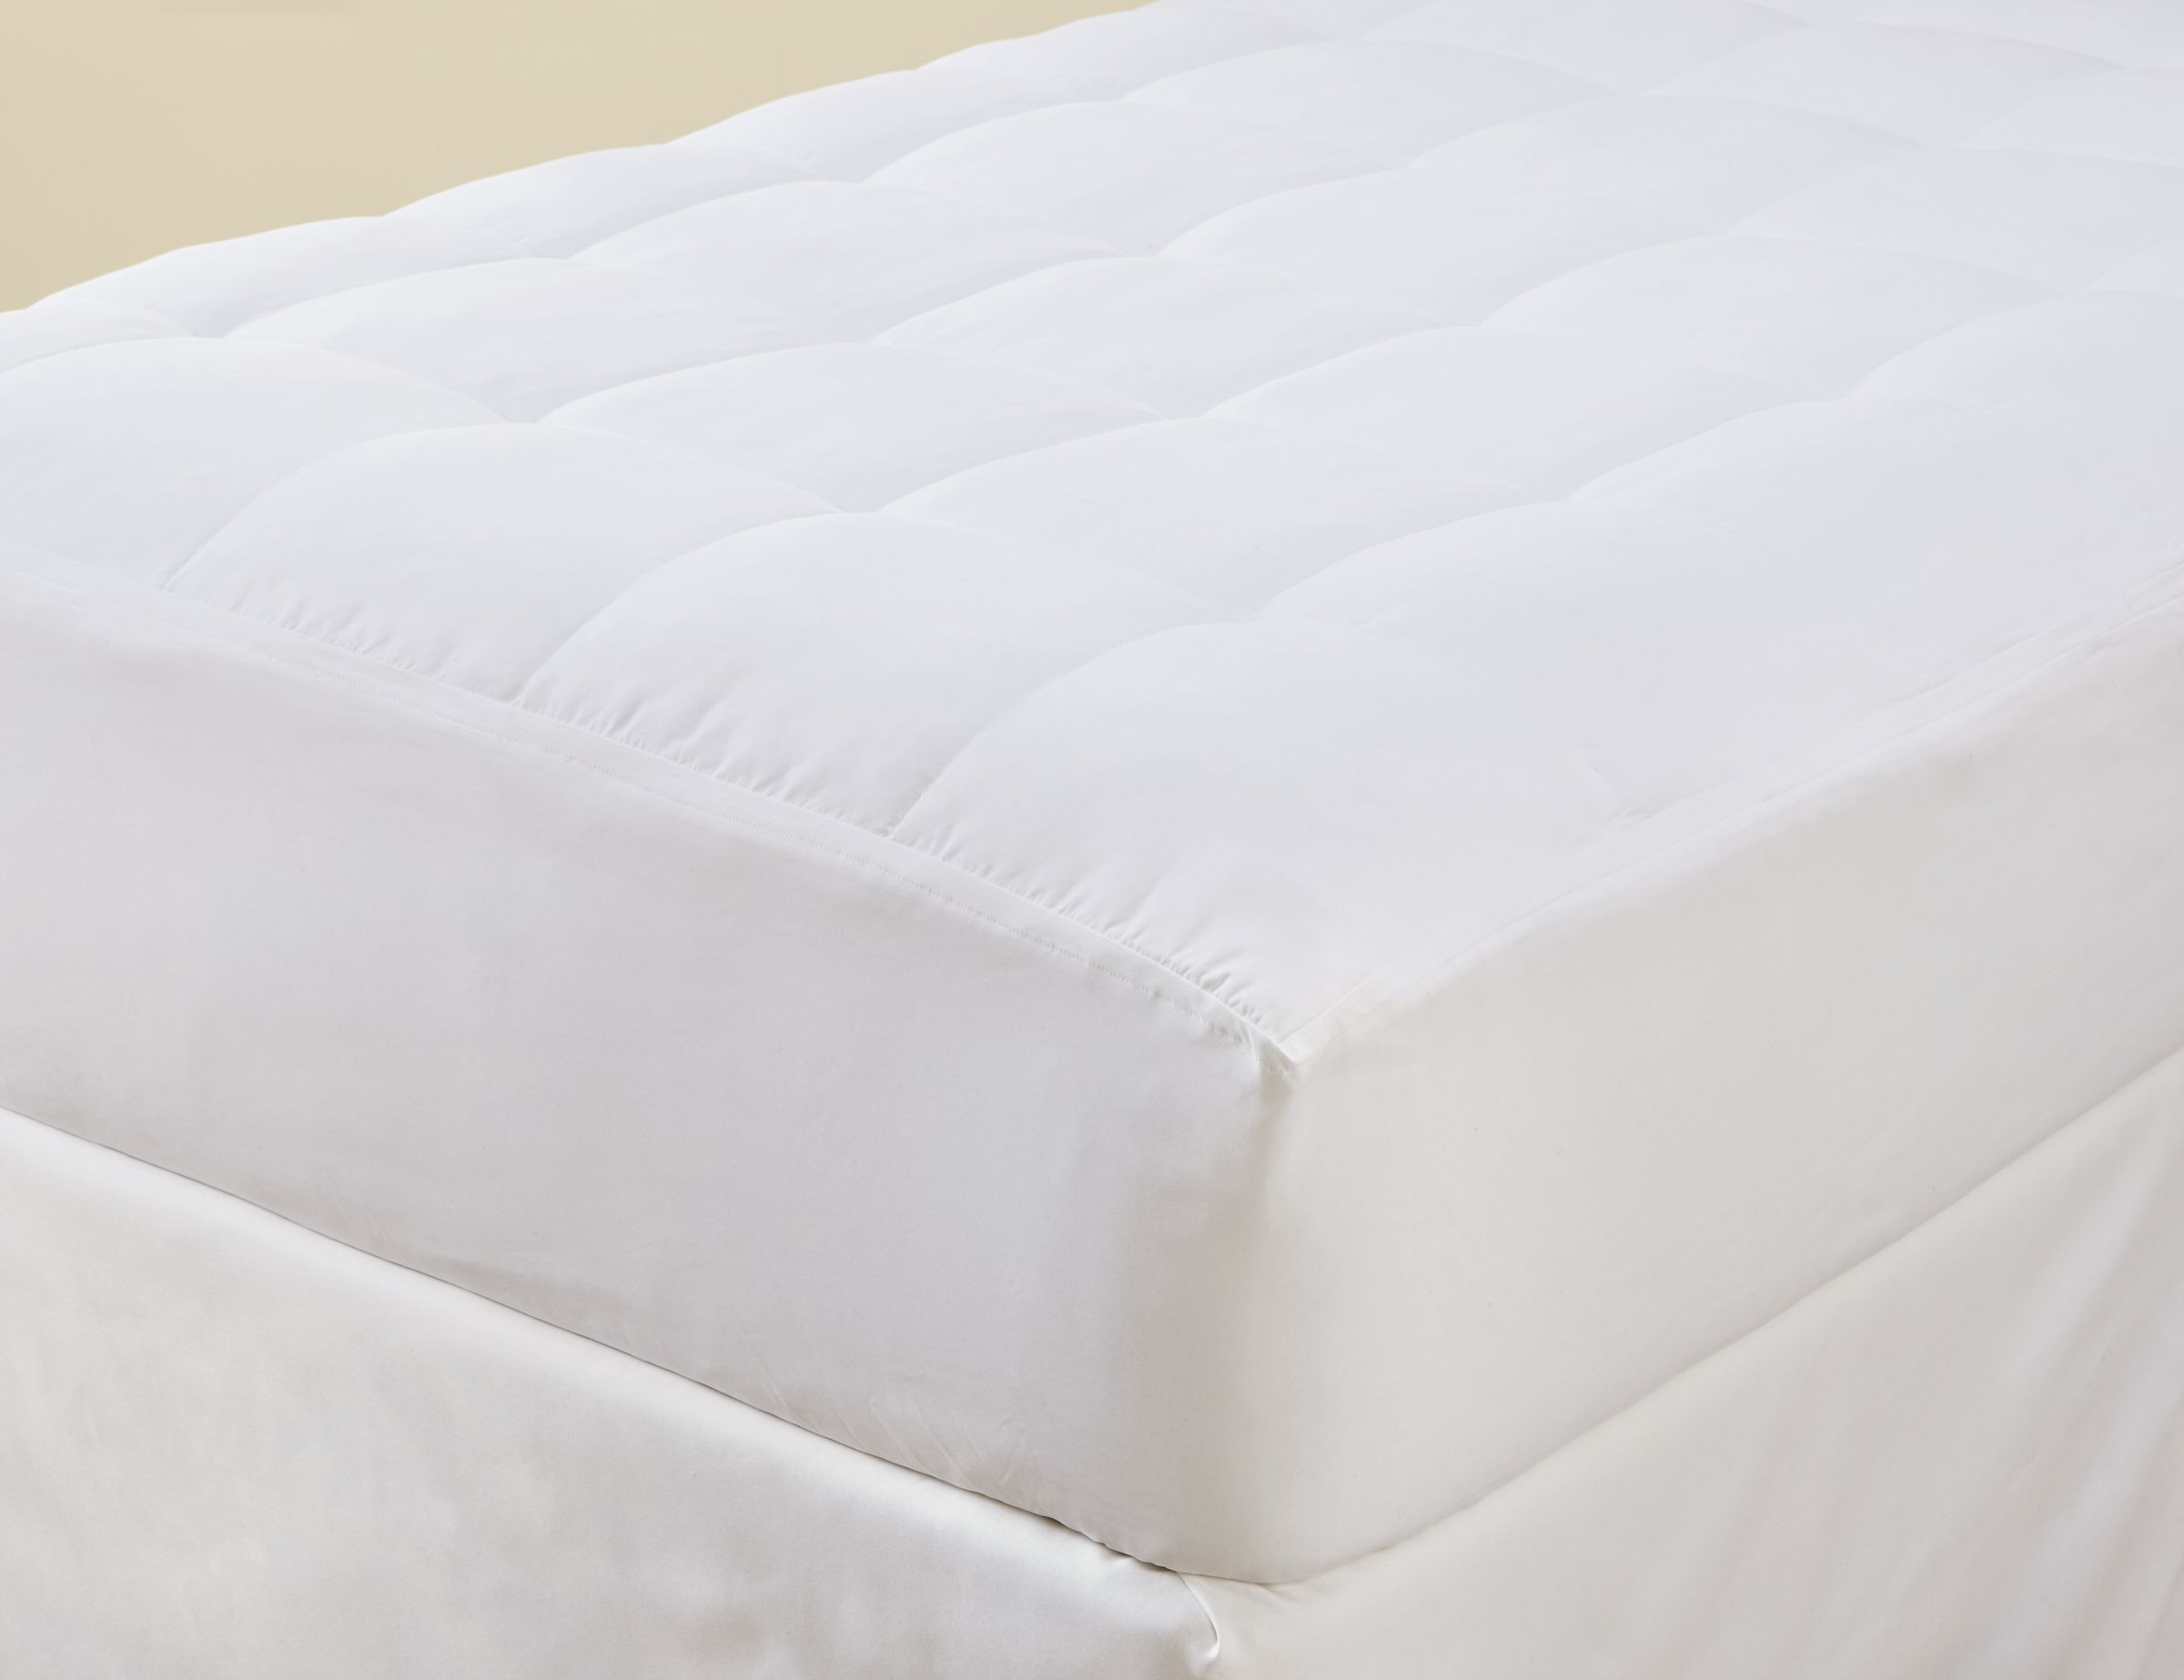 Cannon White Total Protection Mattress Pad